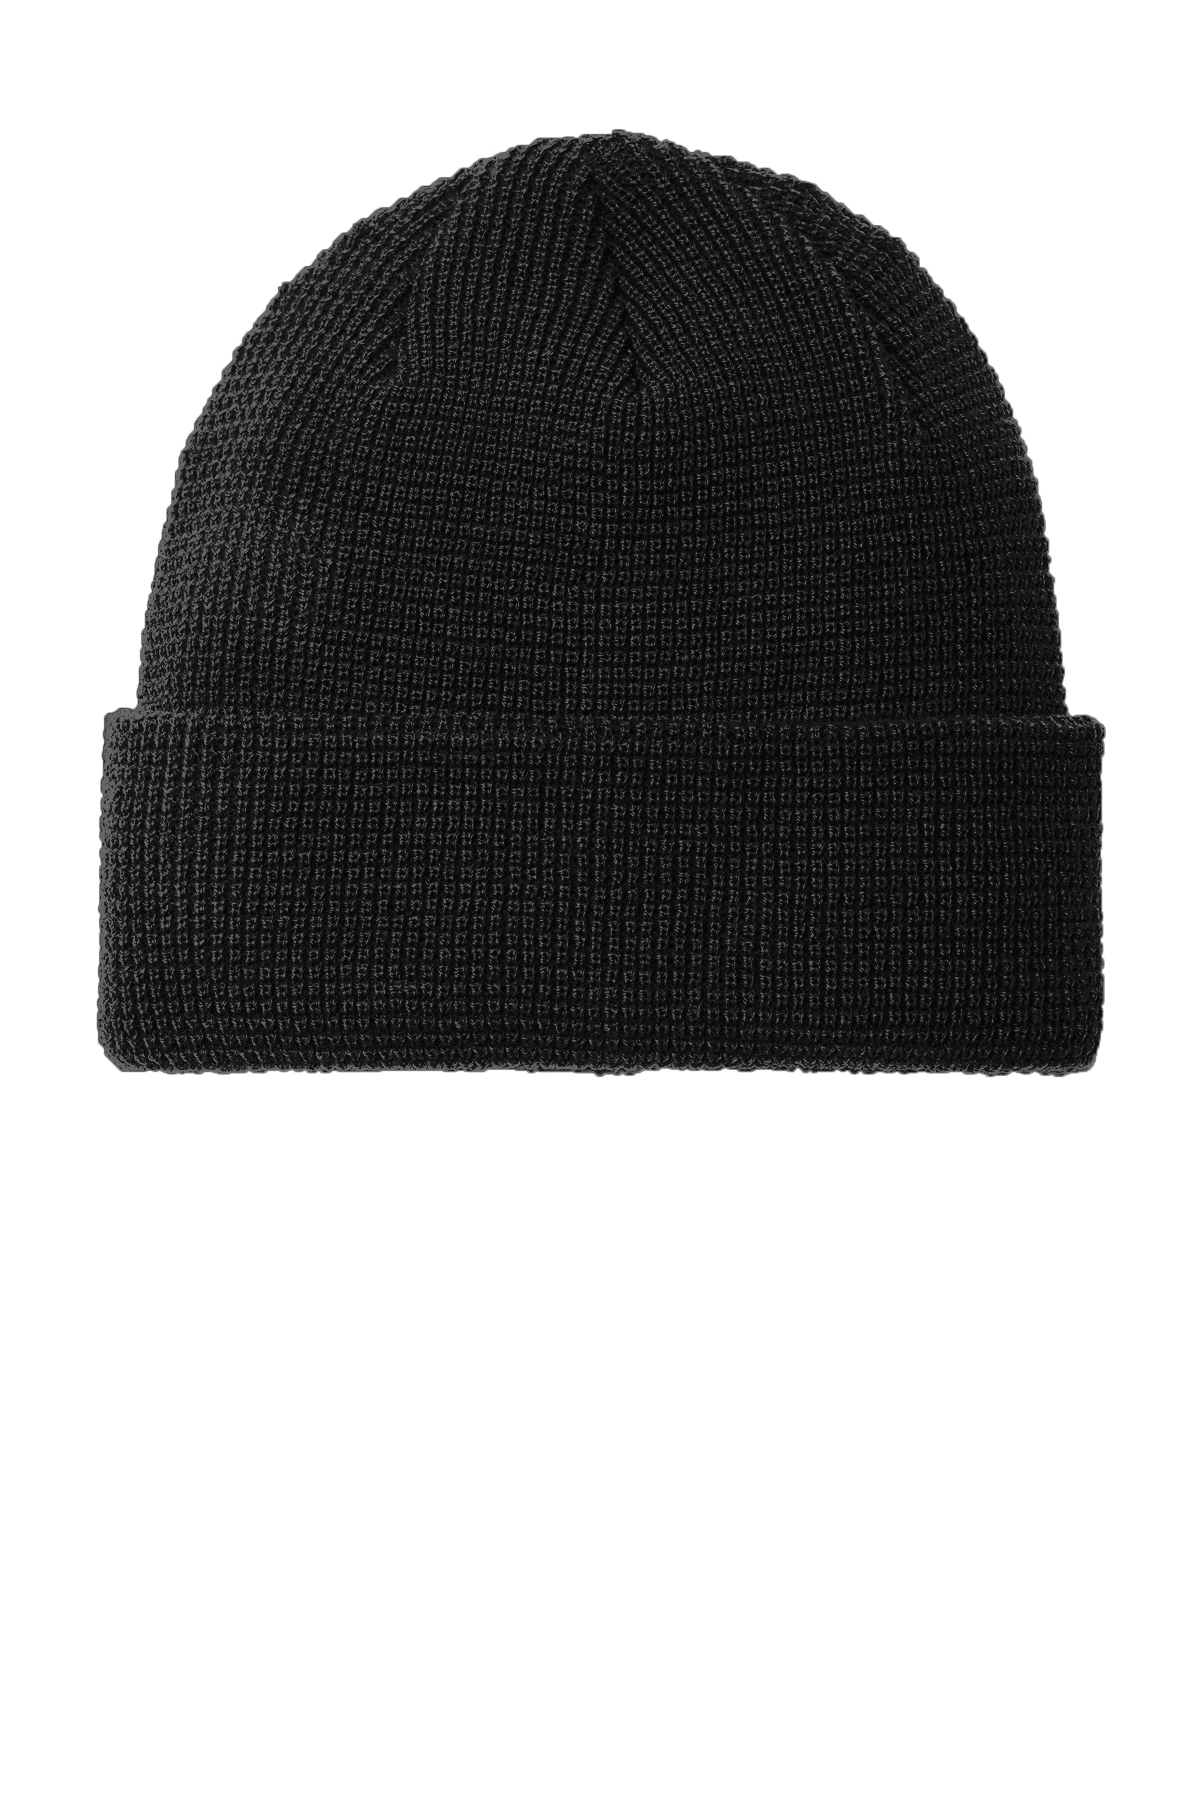 Port Authority Thermal Knit Cuffed Port | | Authority Product Beanie